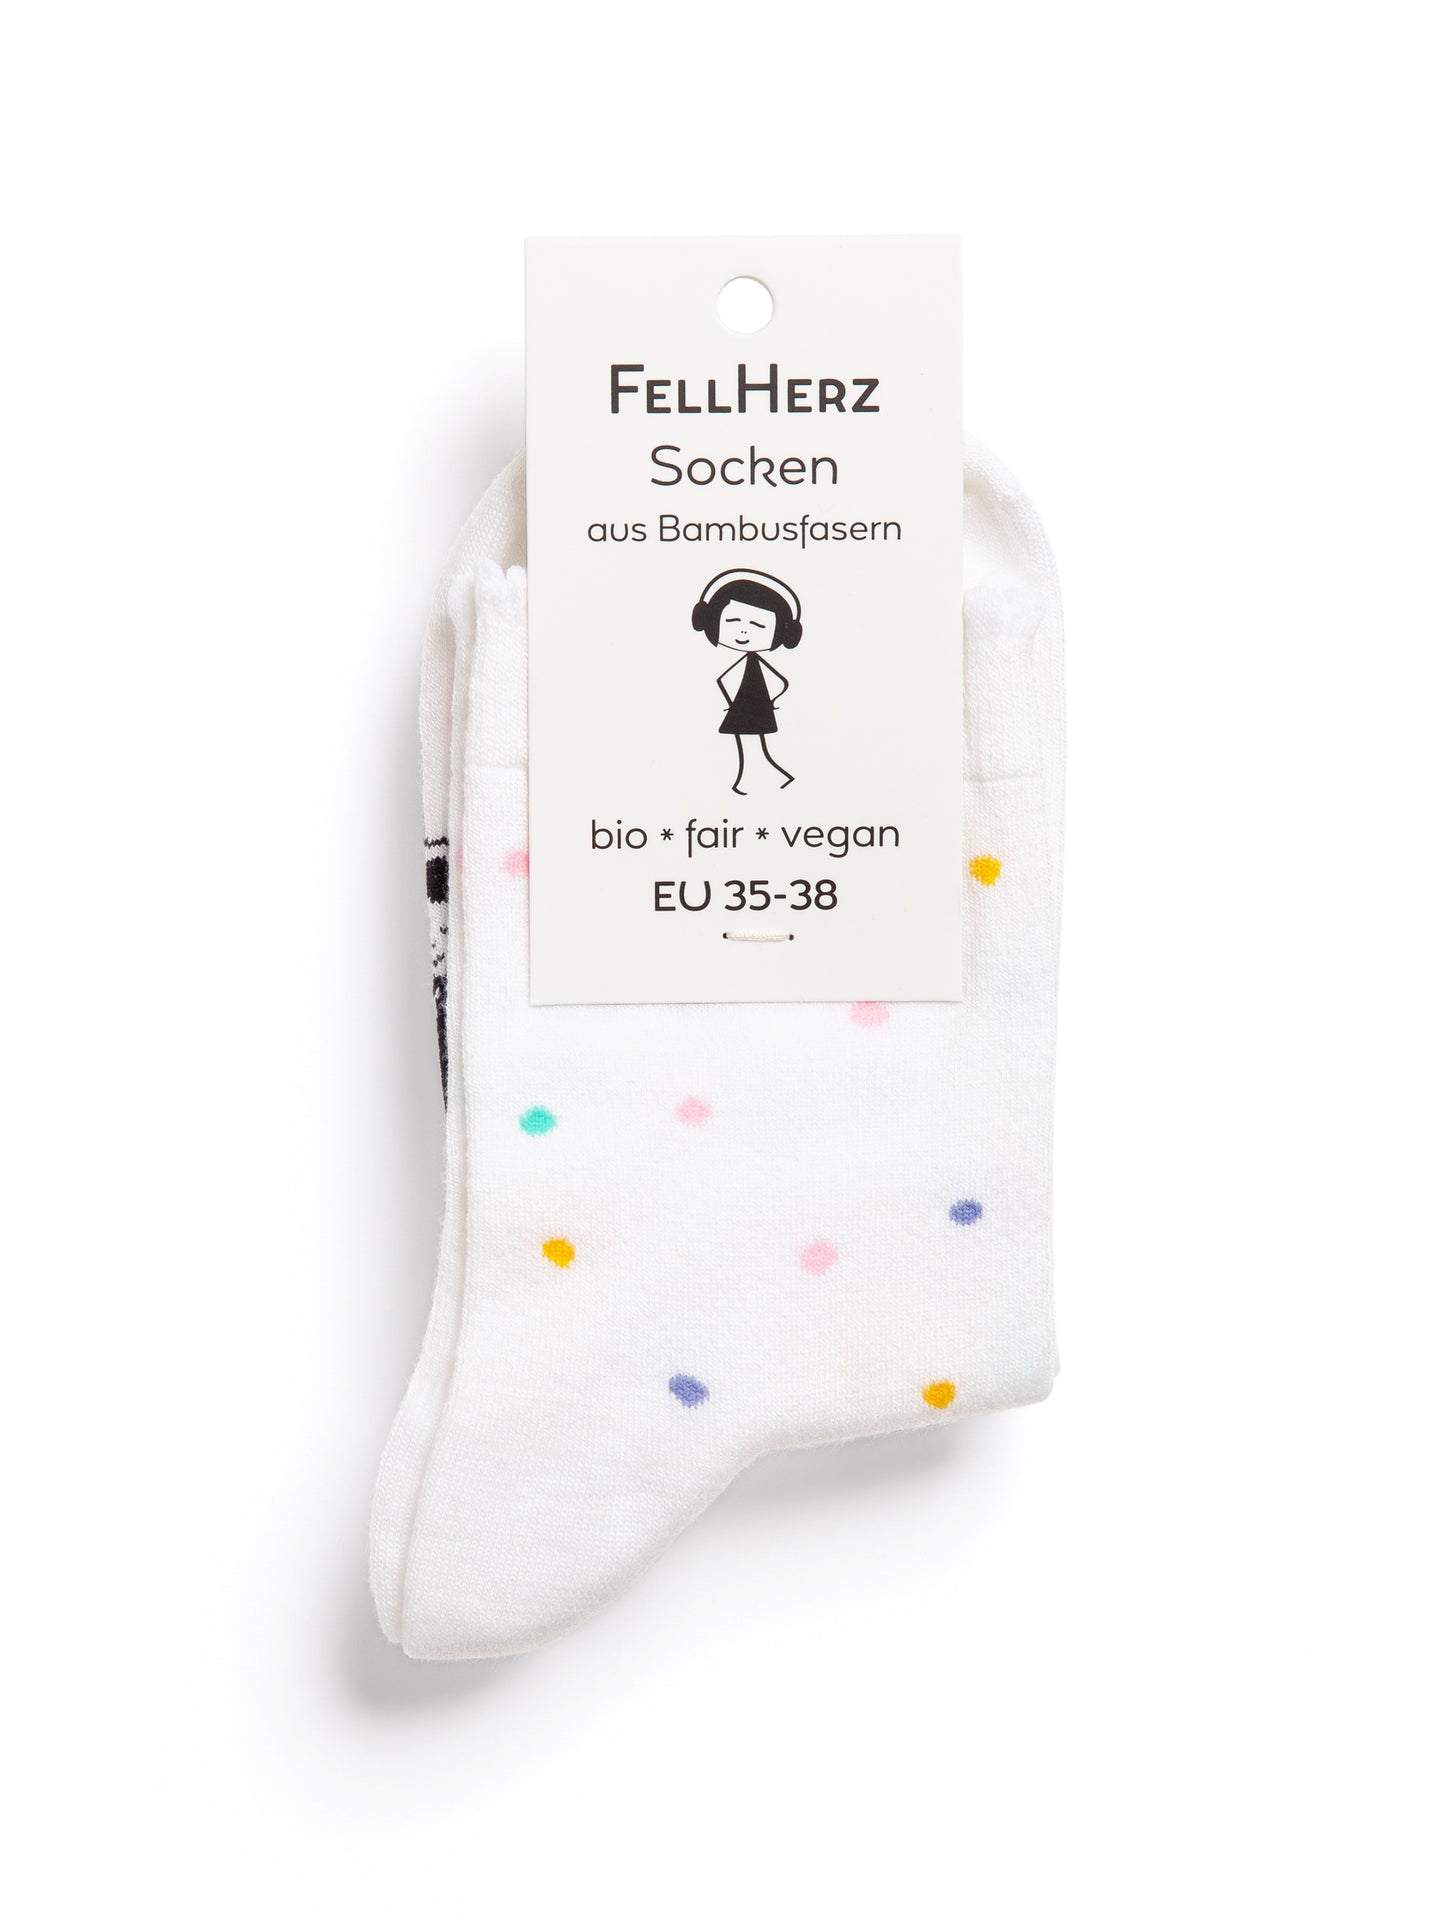 Pack of 6 socks with viscose (made of bamboo) mix confetti white and heart black